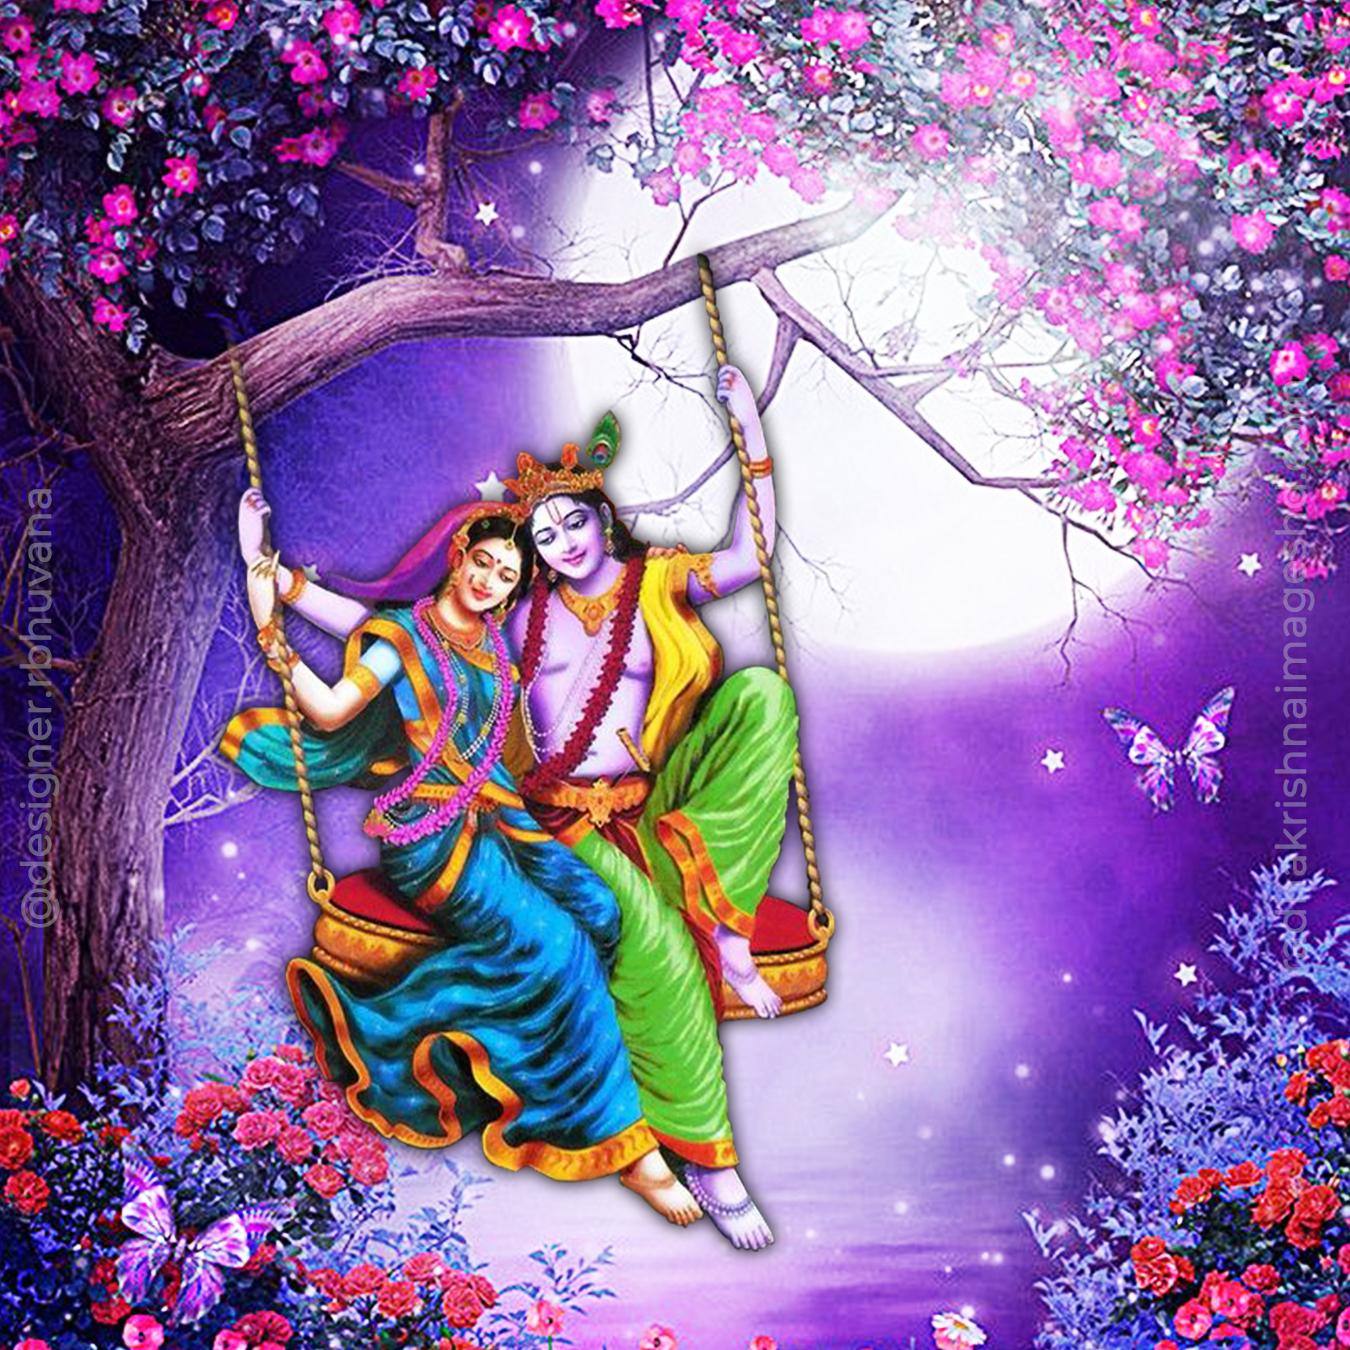 Radha Krishna Images Wallpapers Paintings Pictures Photos 3